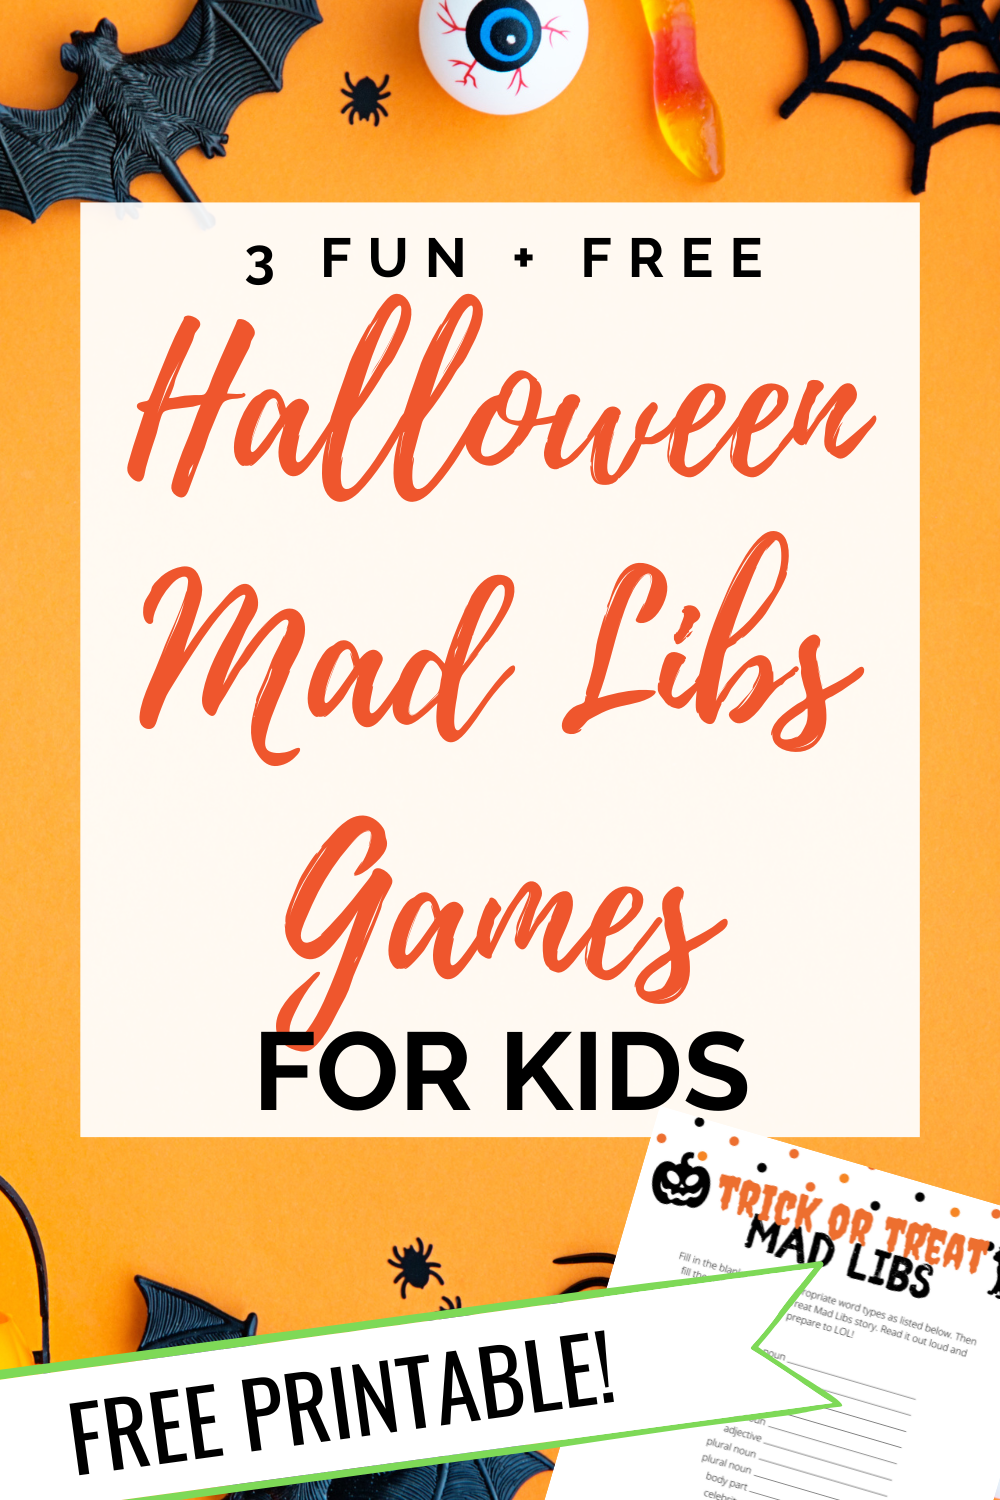 3 Fun and Free Halloween Mad Libs Stories for Kids